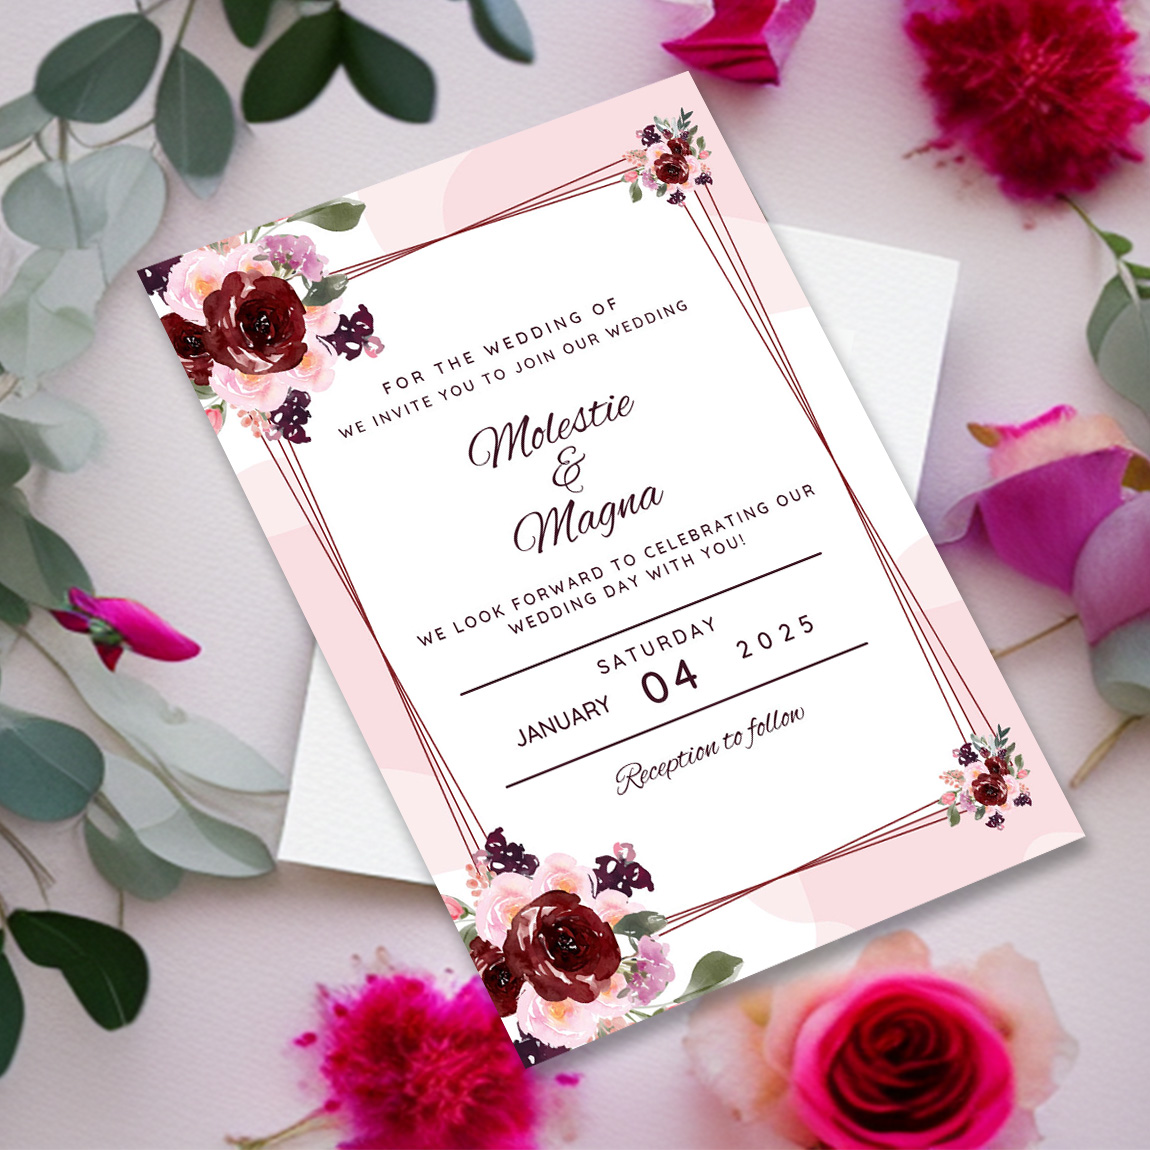 Image of wonderful wedding invitation in pink colors with flowers.